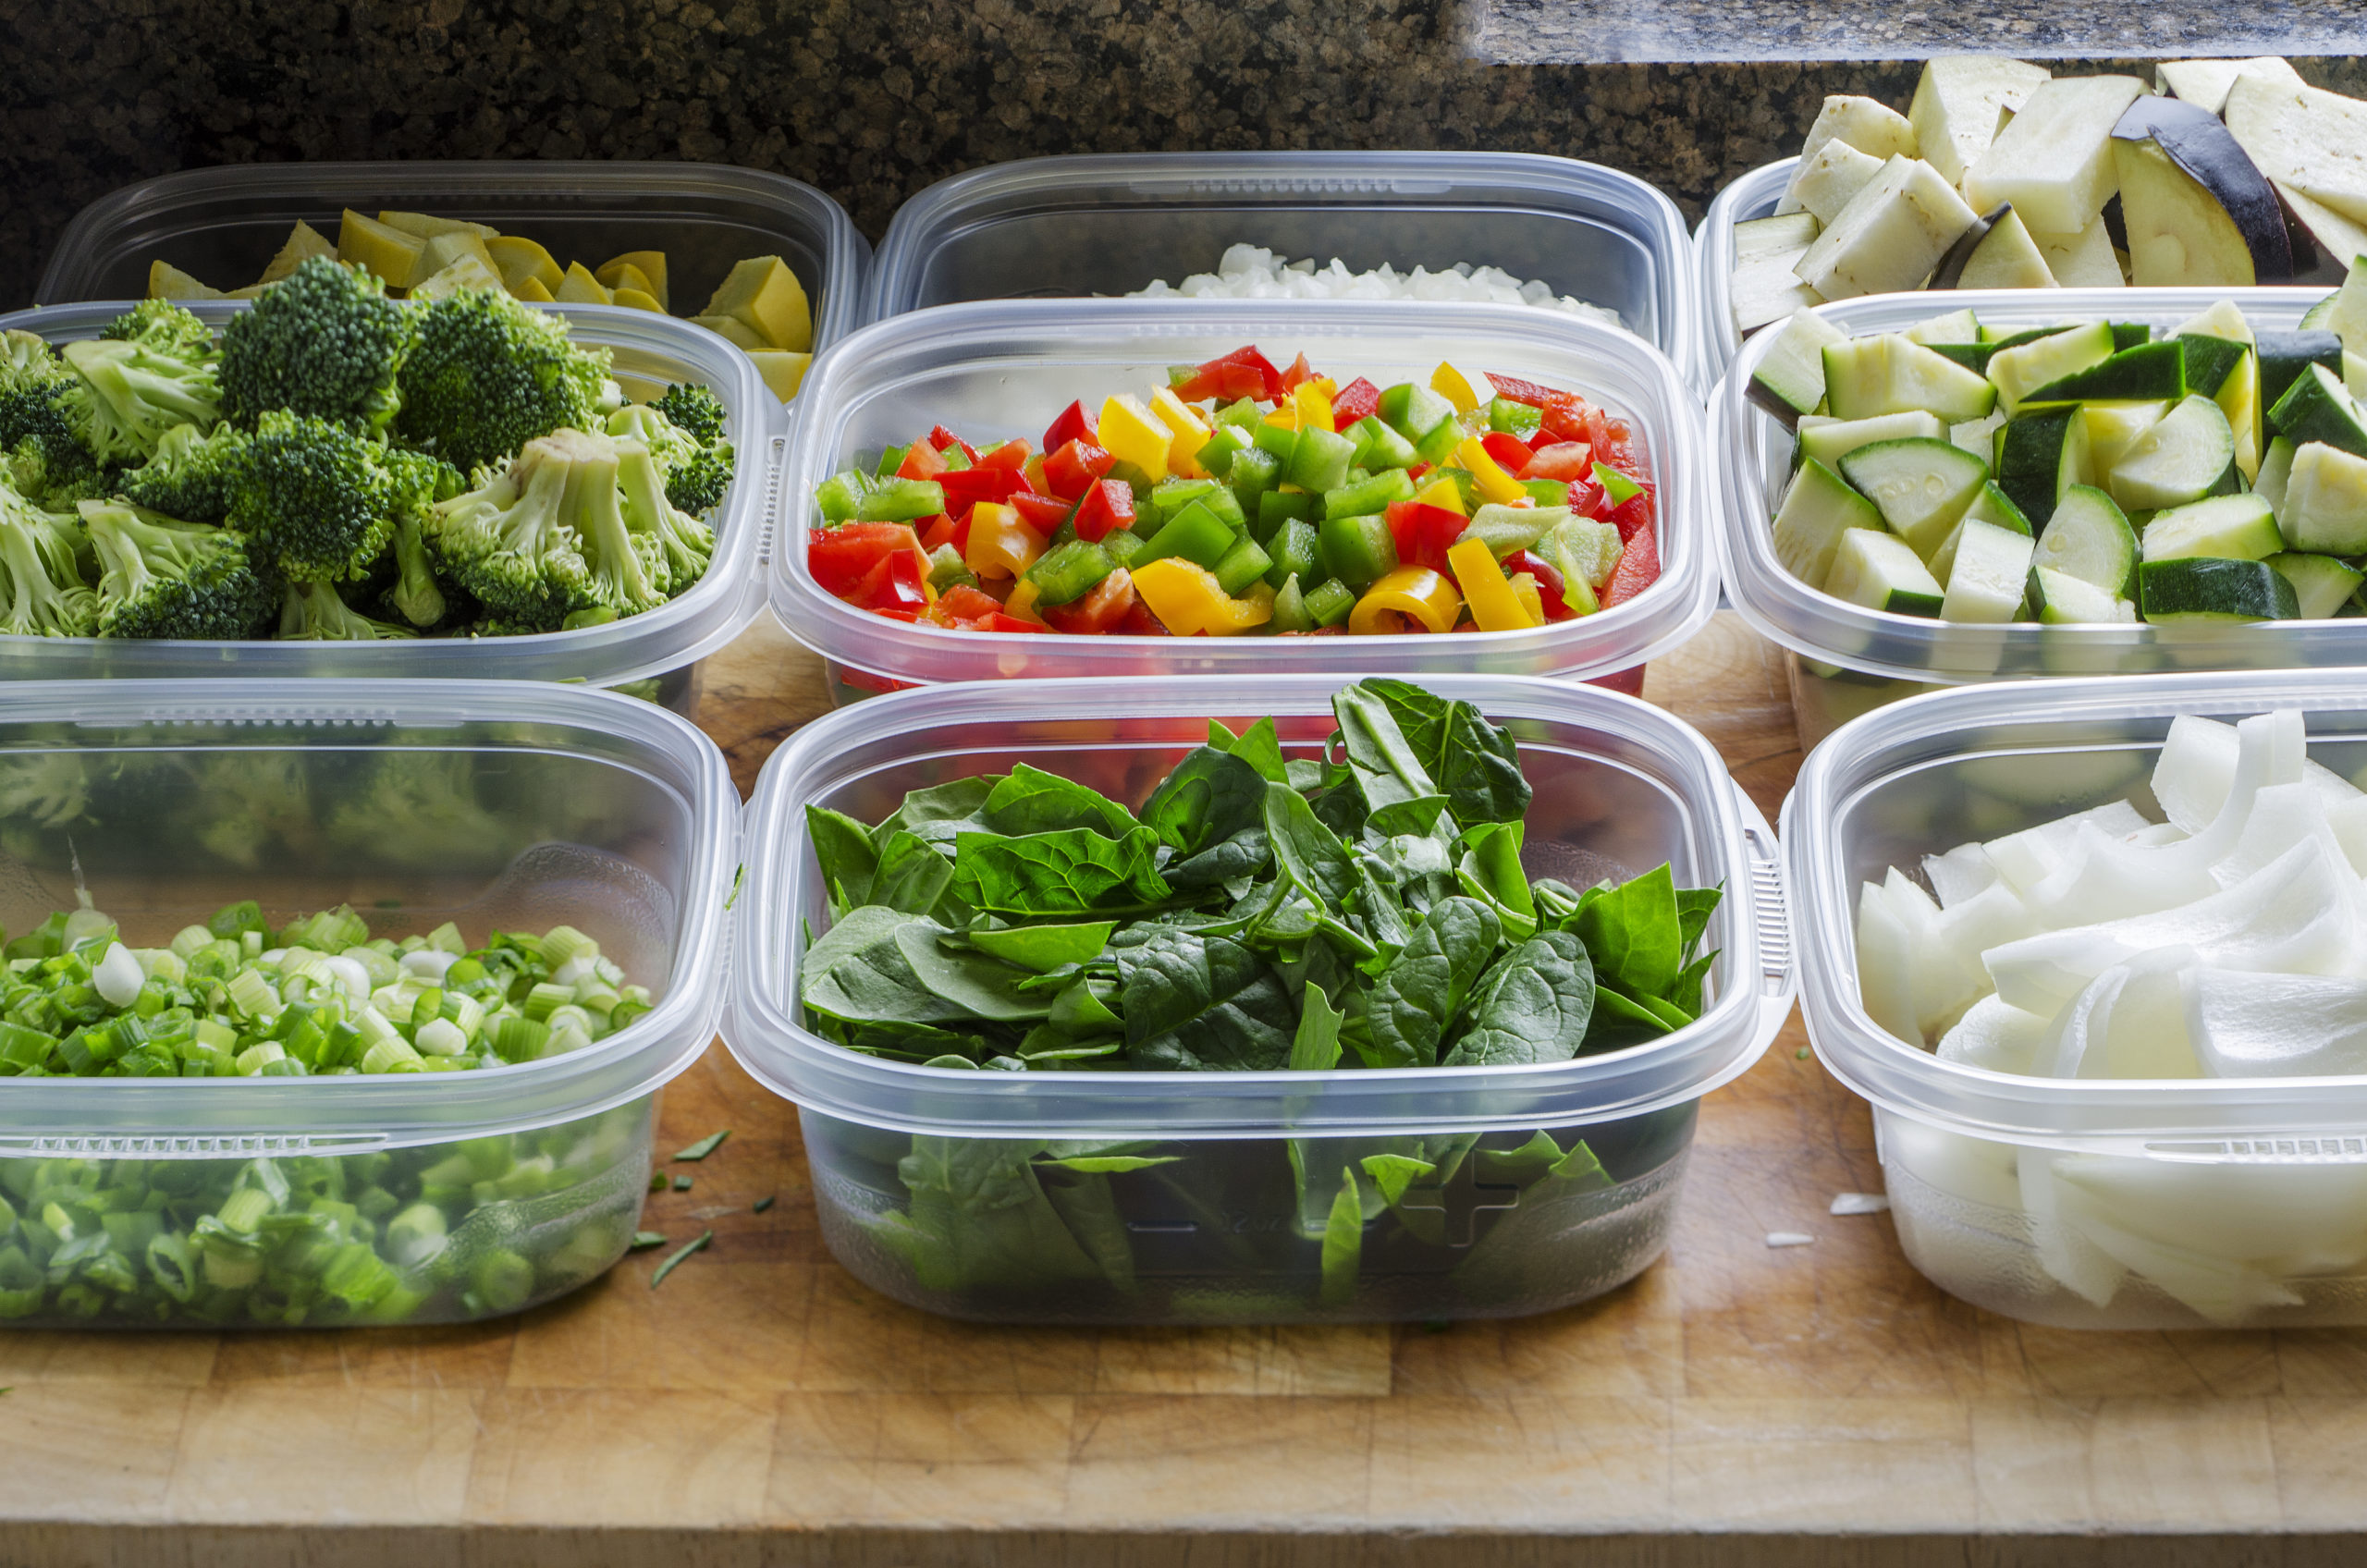 Meal Prep: Conquering Your Healthy Eating Goals, Food & Nutrition